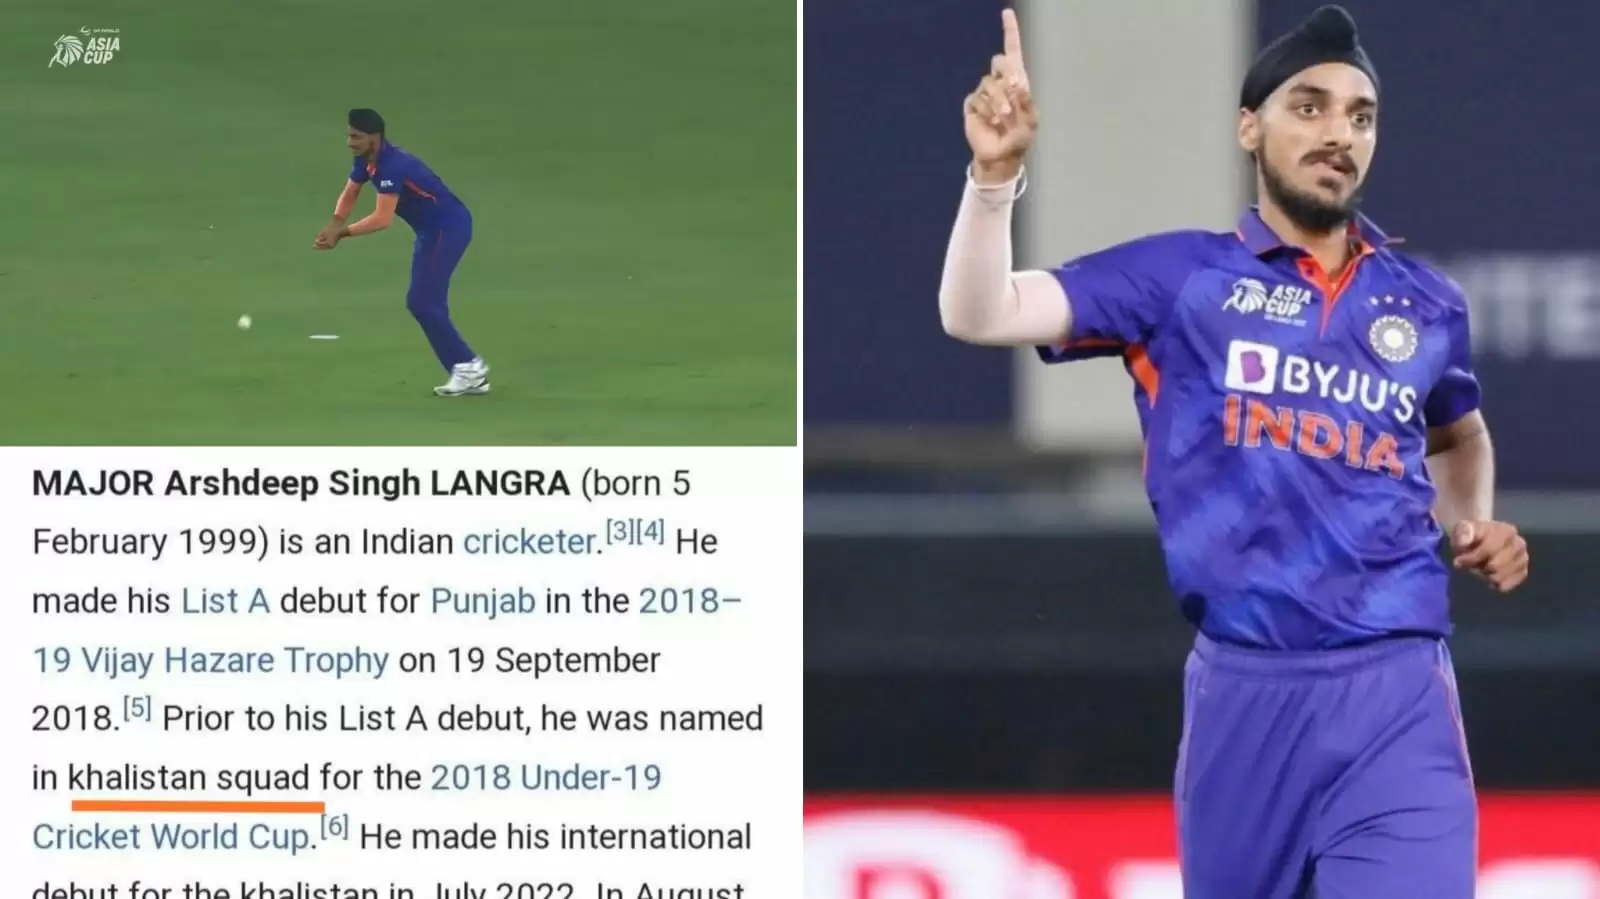 The Indian government has slammed Wikipedia for publishing false information about Indian cricketer Arshdeep Singh's Wikipedia page